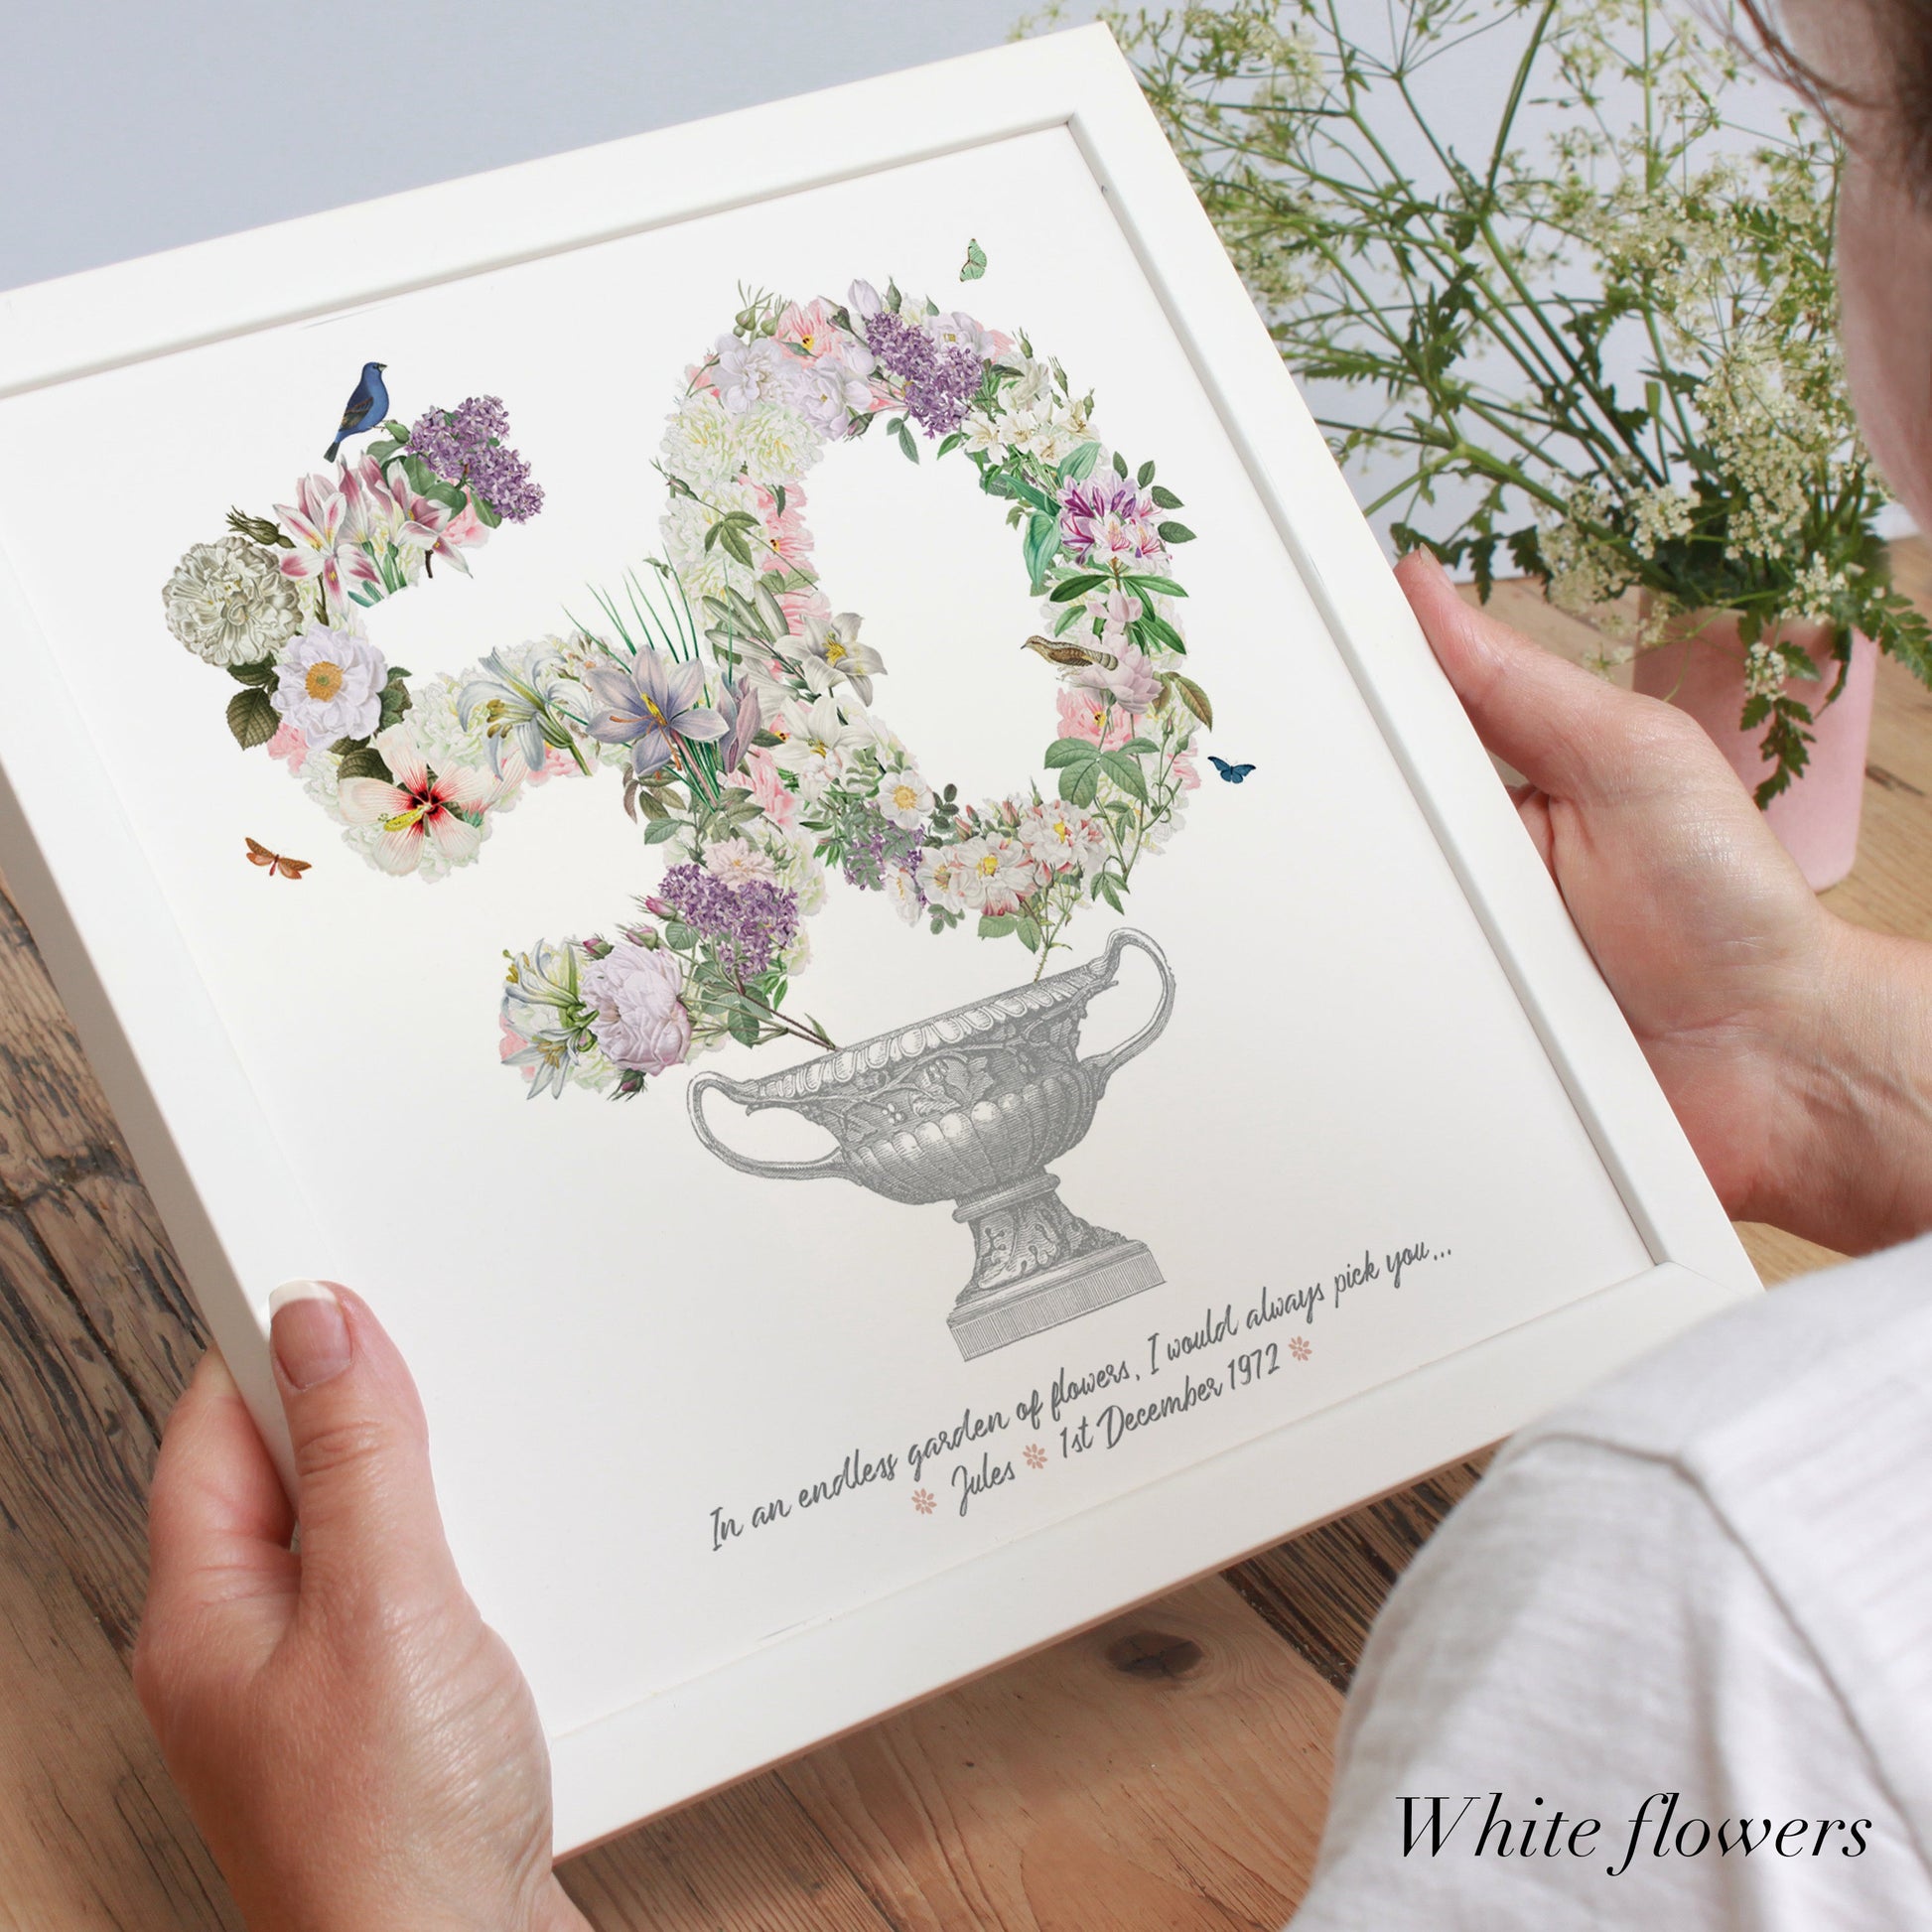 50th birthday gift with white flowers in a Victorian urn in a white frame